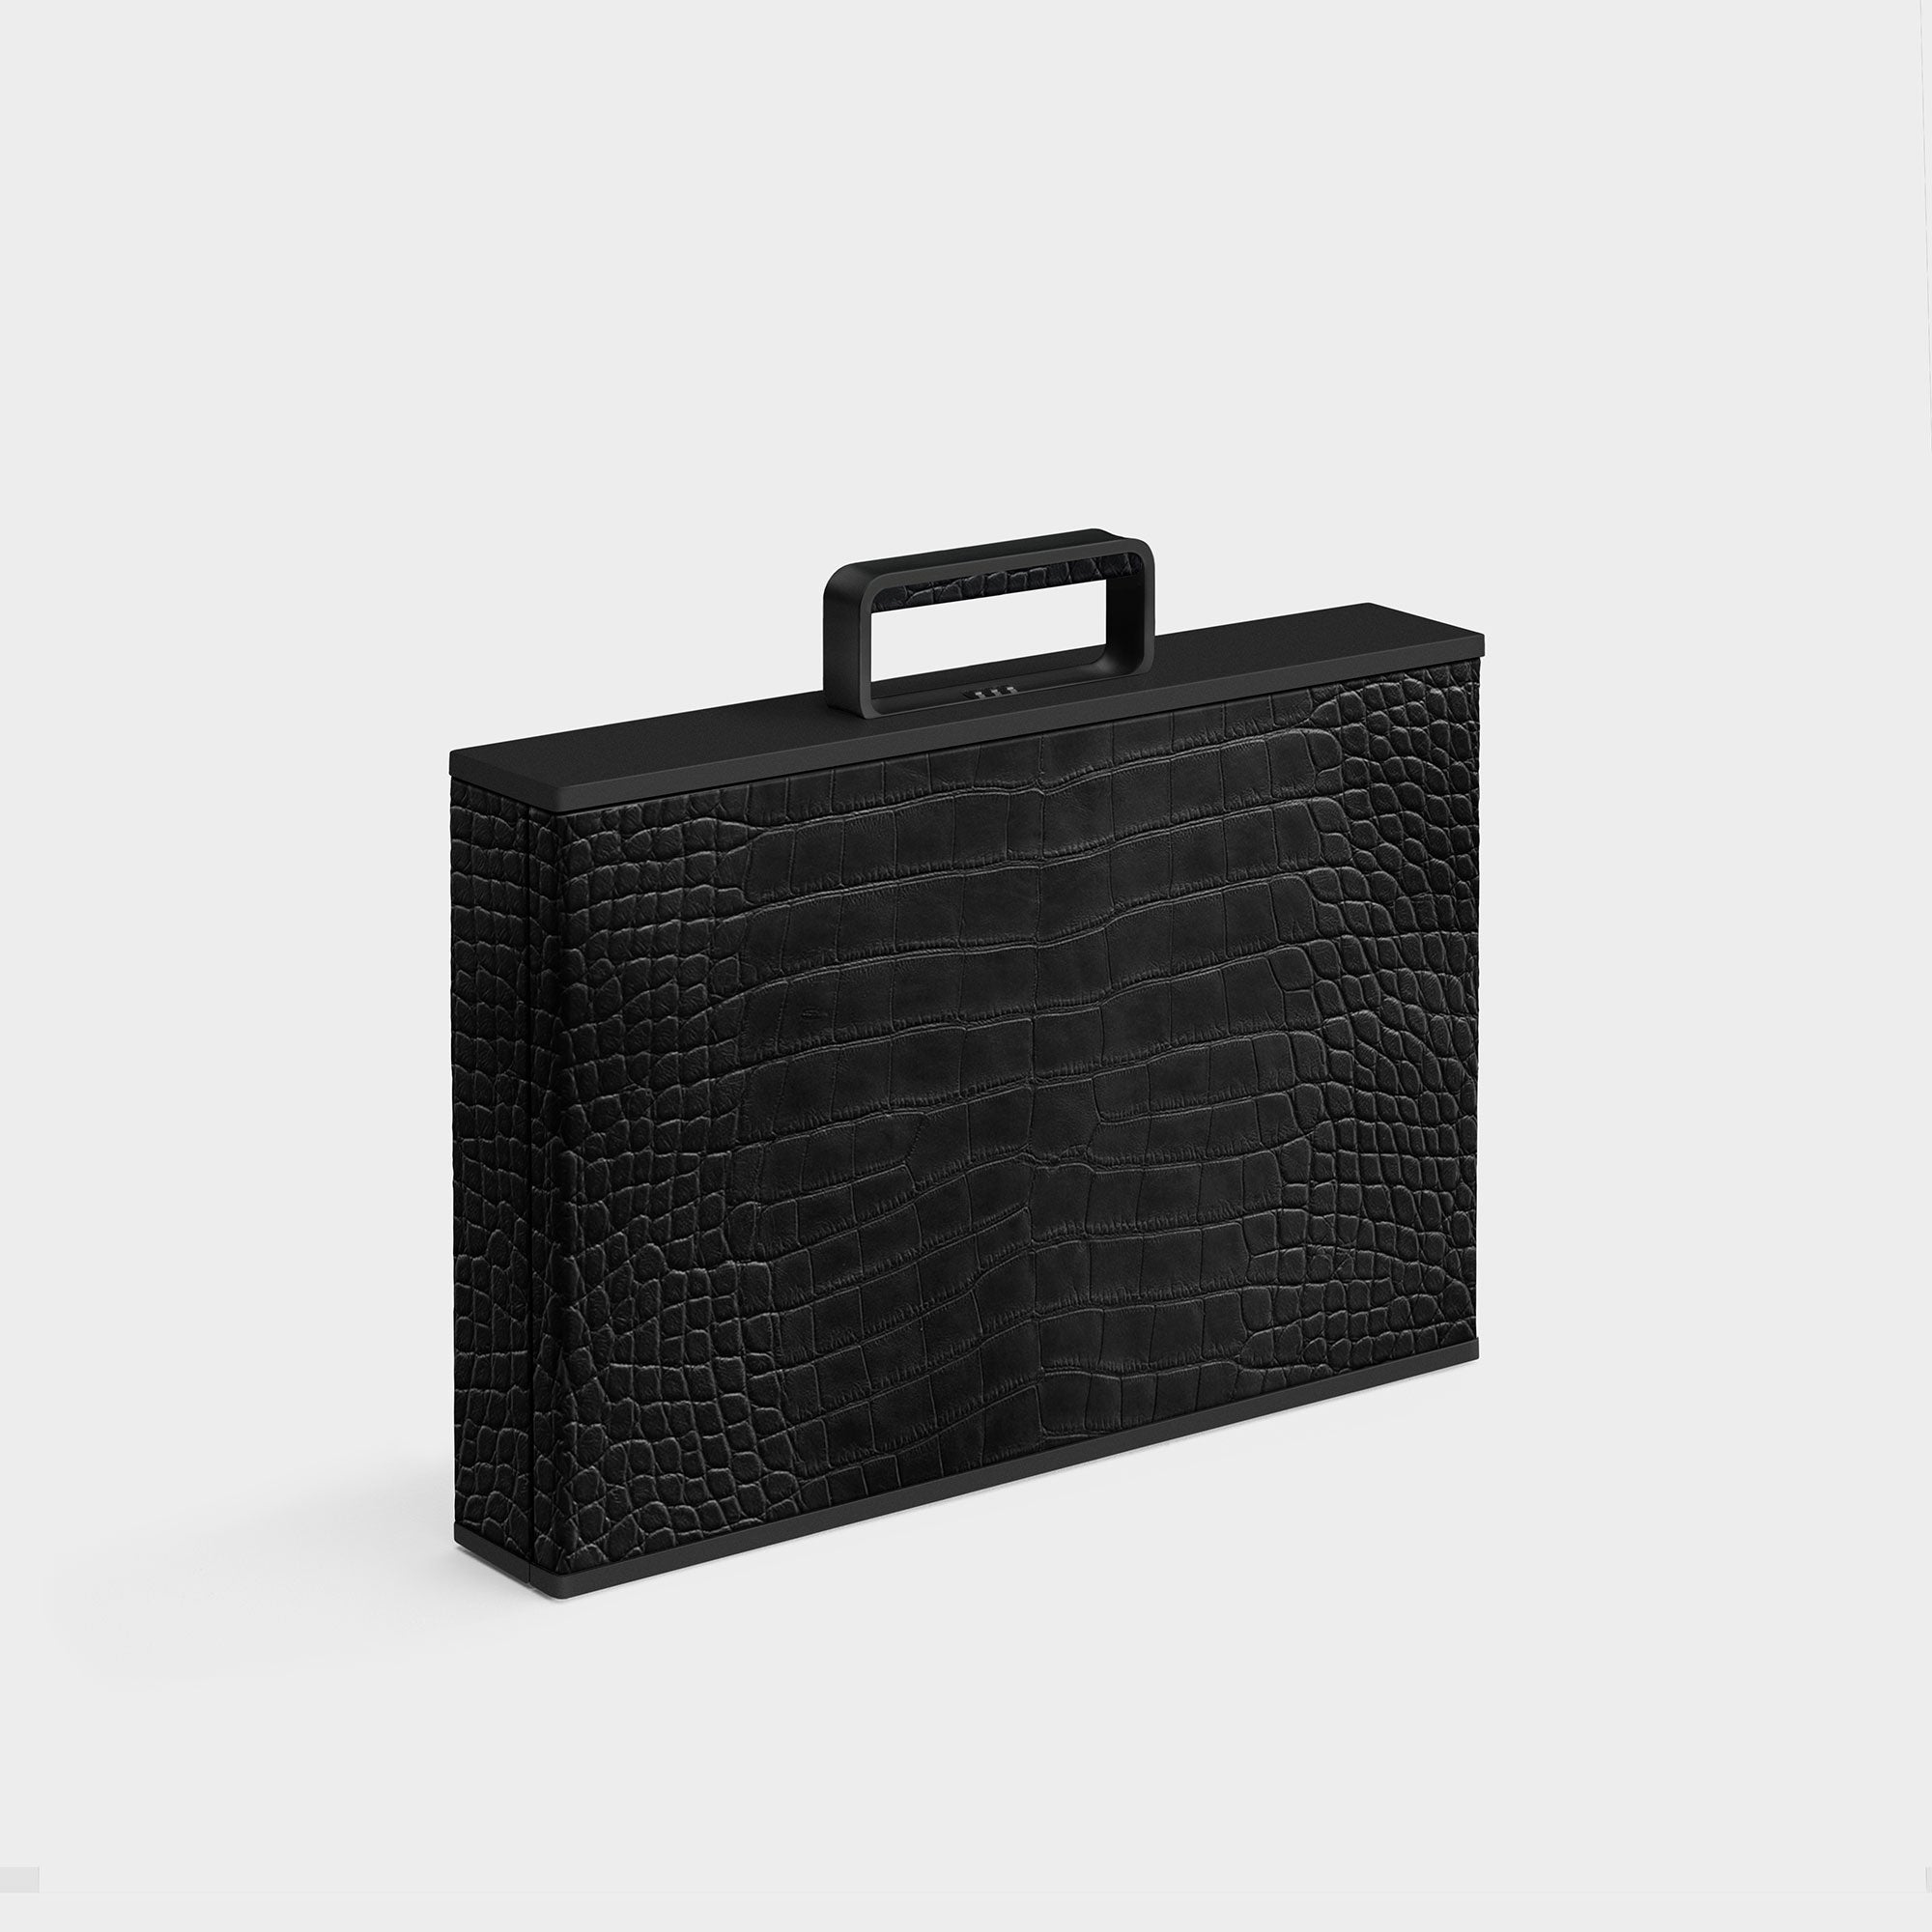 Luxury watch briefcase by Charles Simon made by hand in Canada from black Crocodile leather 